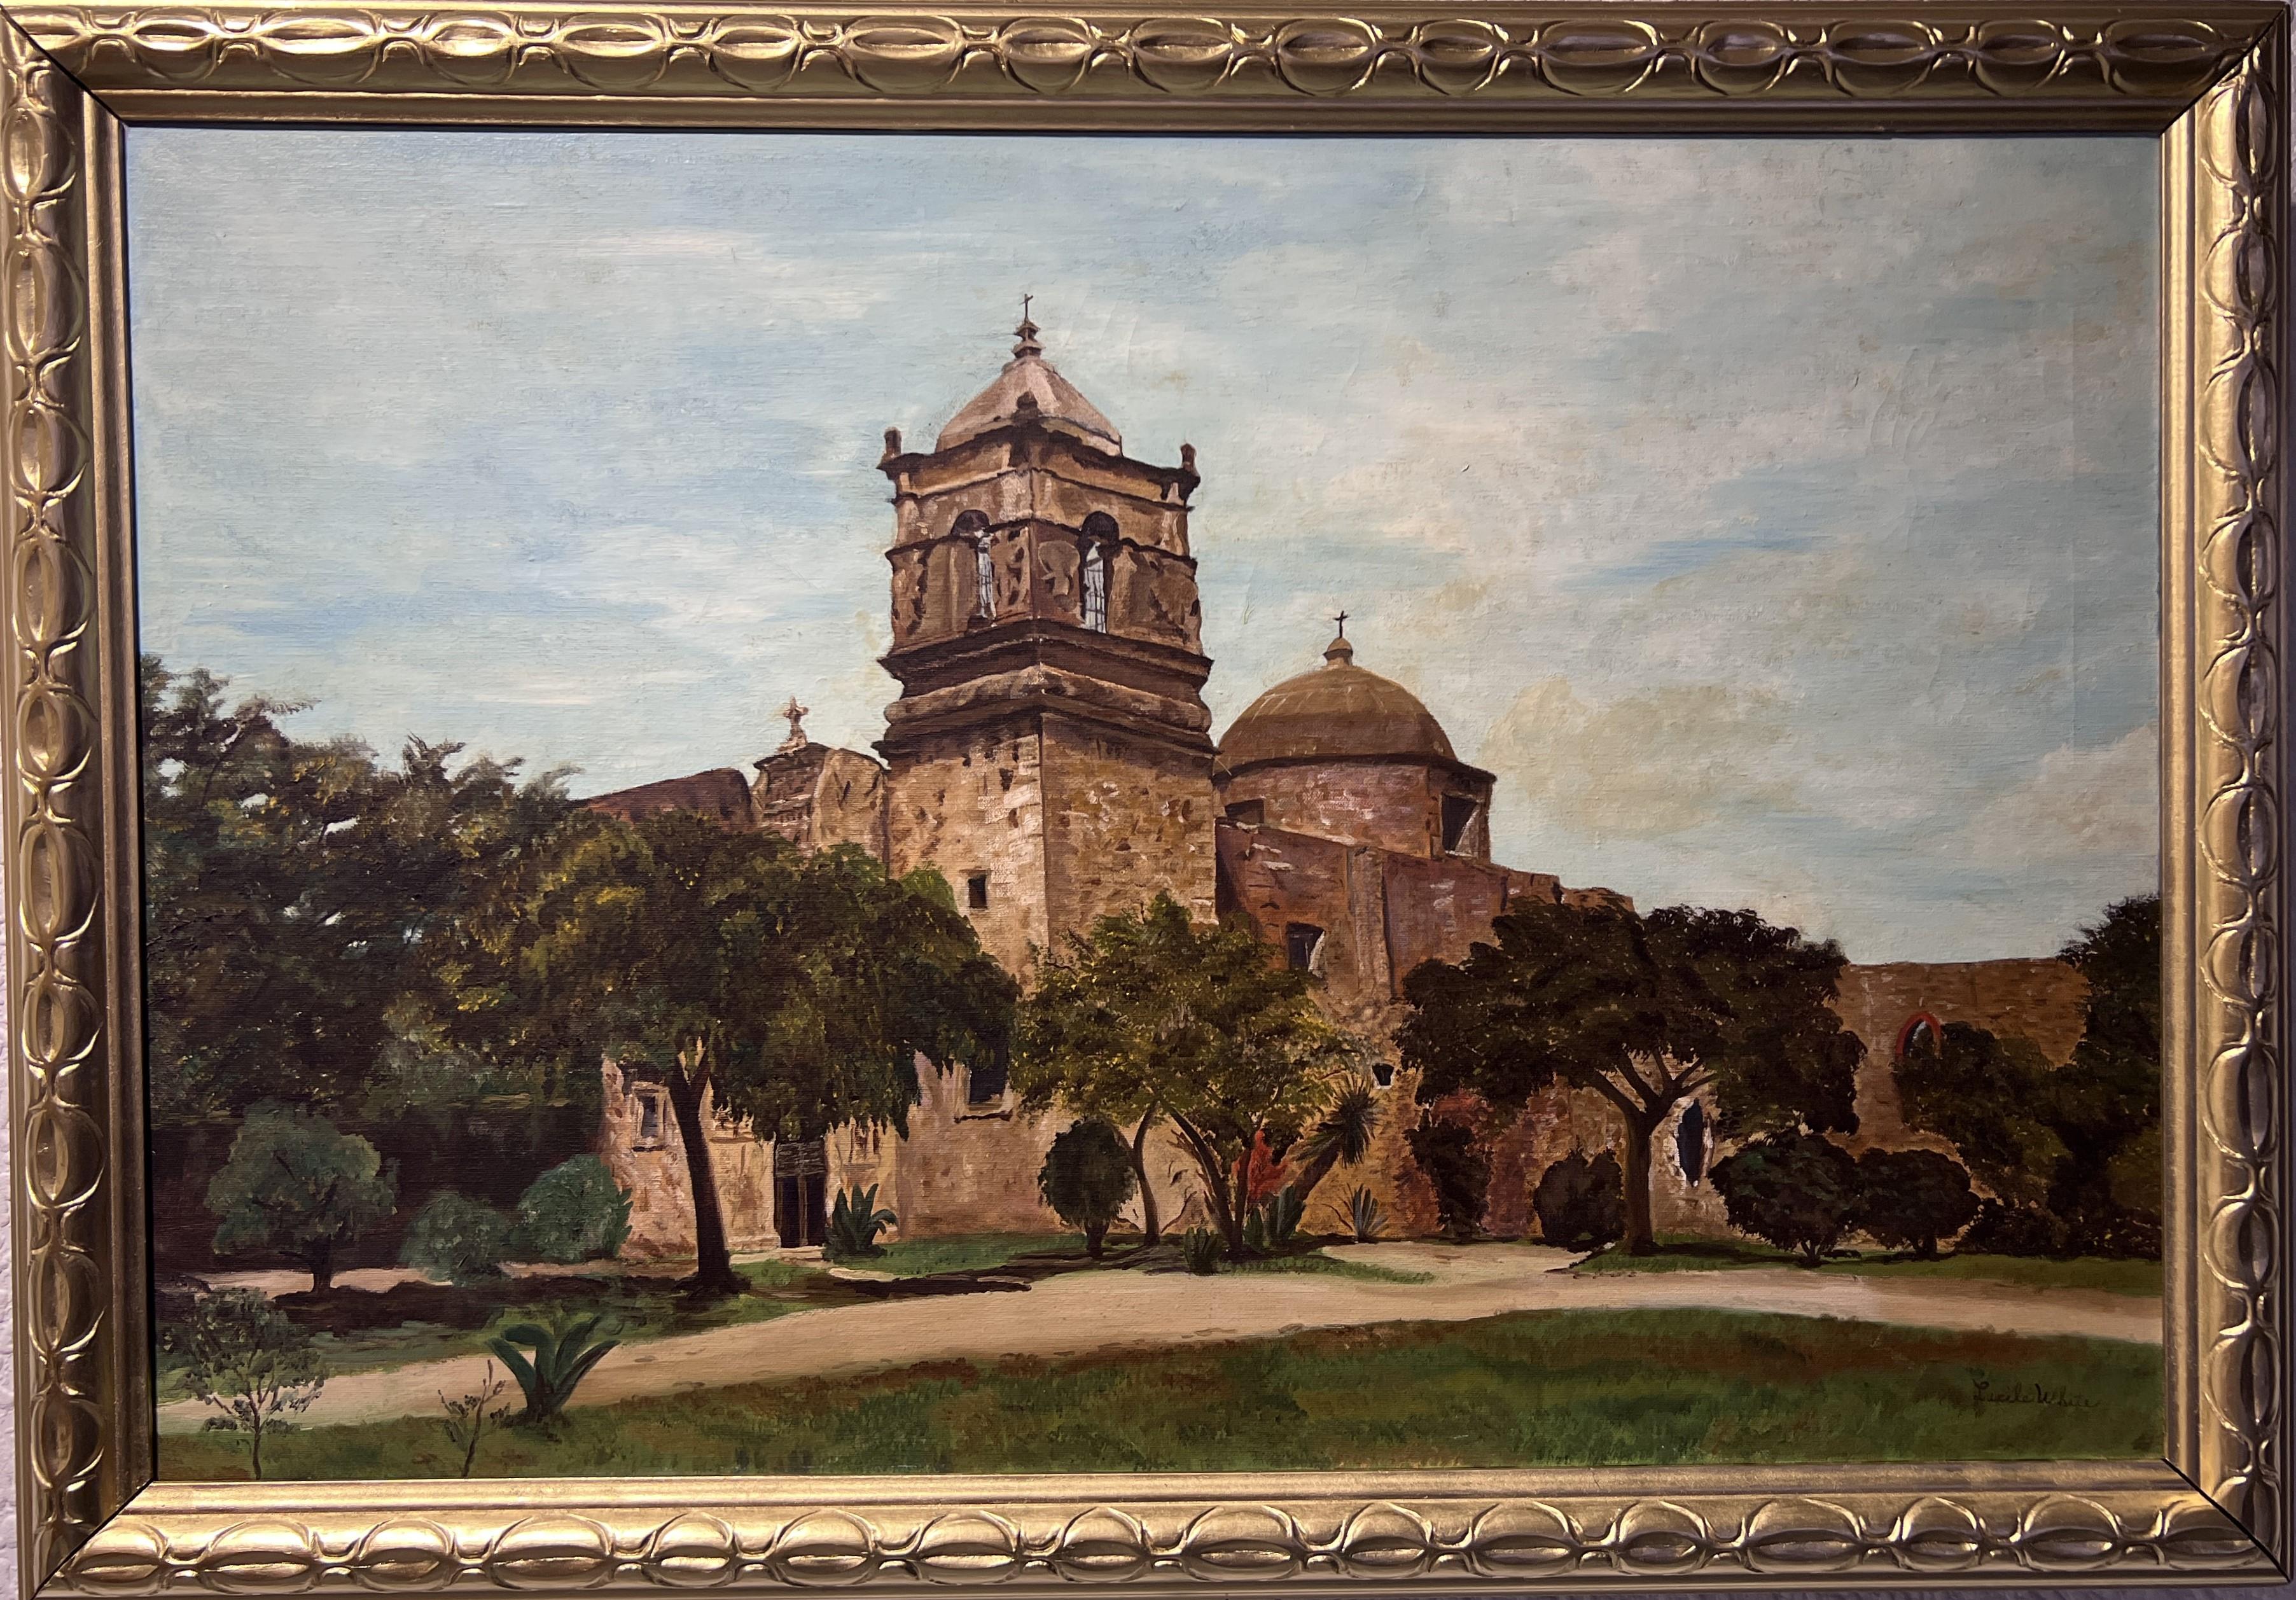 This is an original  vintage oil painting on canvas by  Lucile White. The central subject of the artwork is a castle or church, with a grand dome and an elaborate bell tower that punctuates the skyline. The architecture is detailed, featuring the